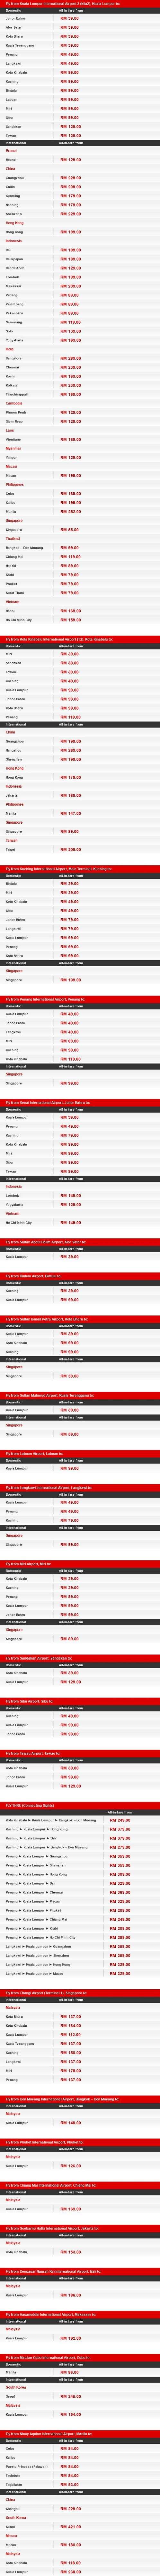 AirAsia Great Getaways This Holiday Fares Details